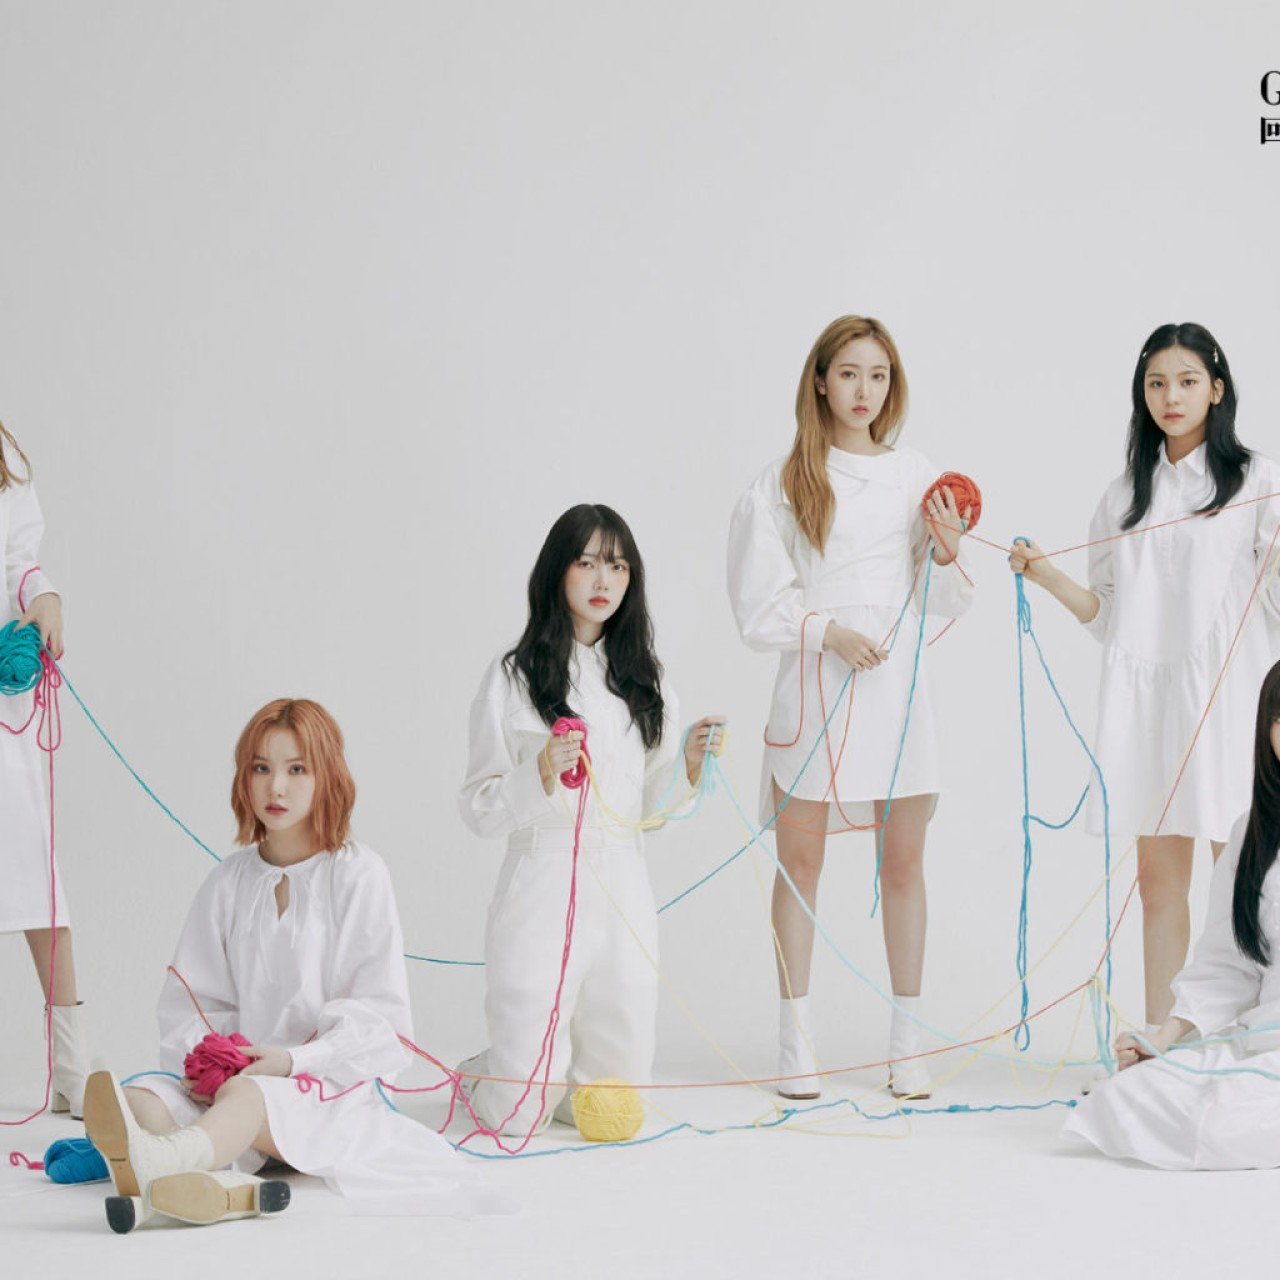 GFriend's 'Labyrinth' album review: K-pop girl group does it all - YP